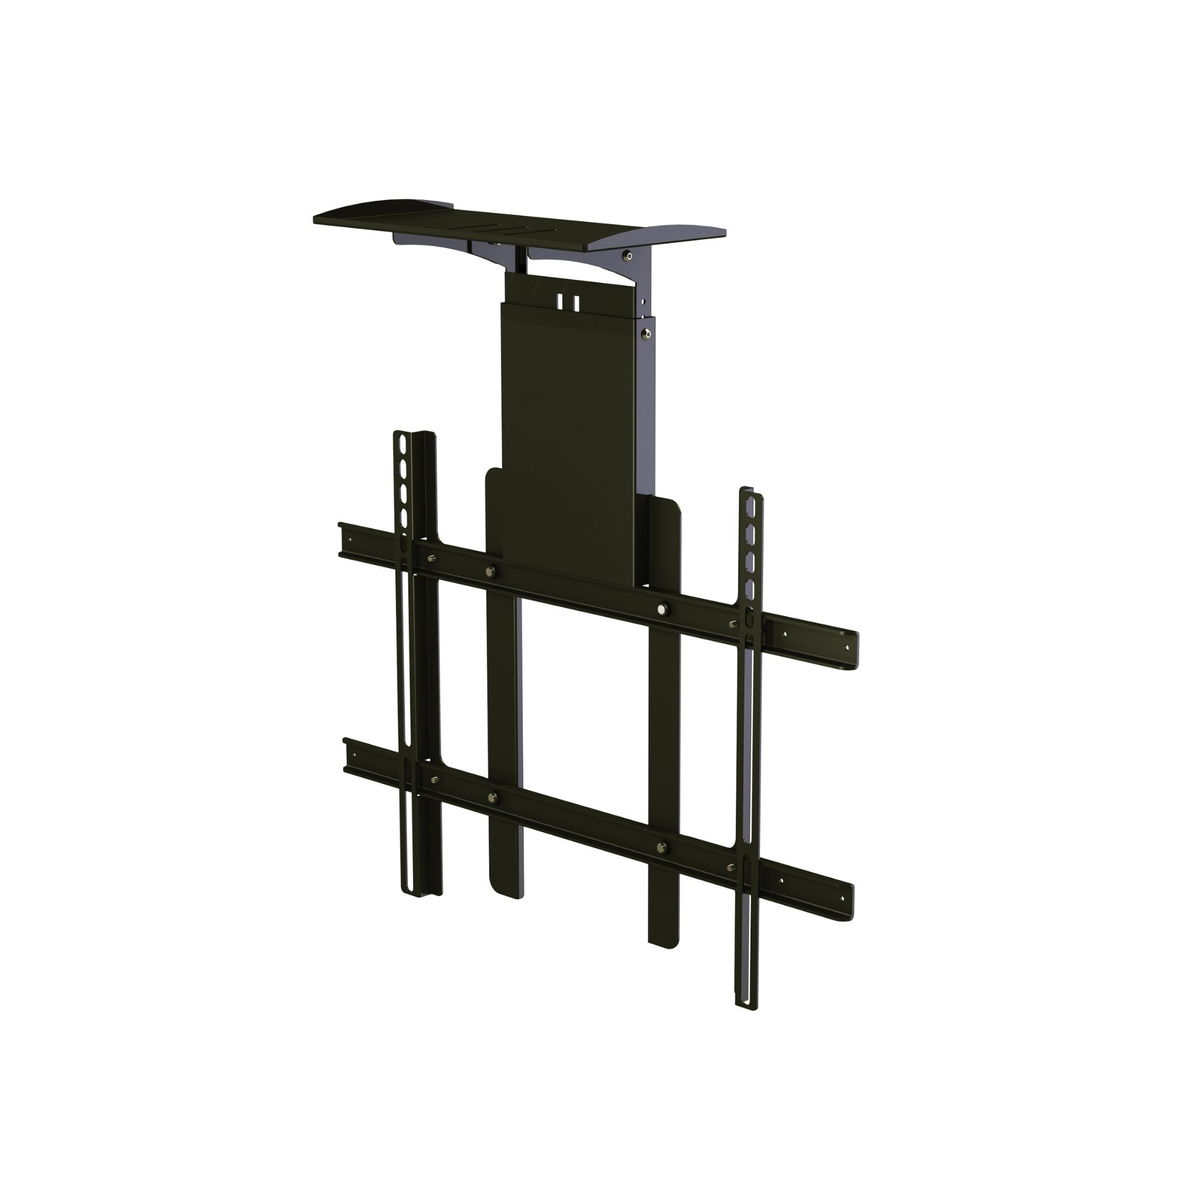 ACC-VCS VC Shelf for Trolley/Stand